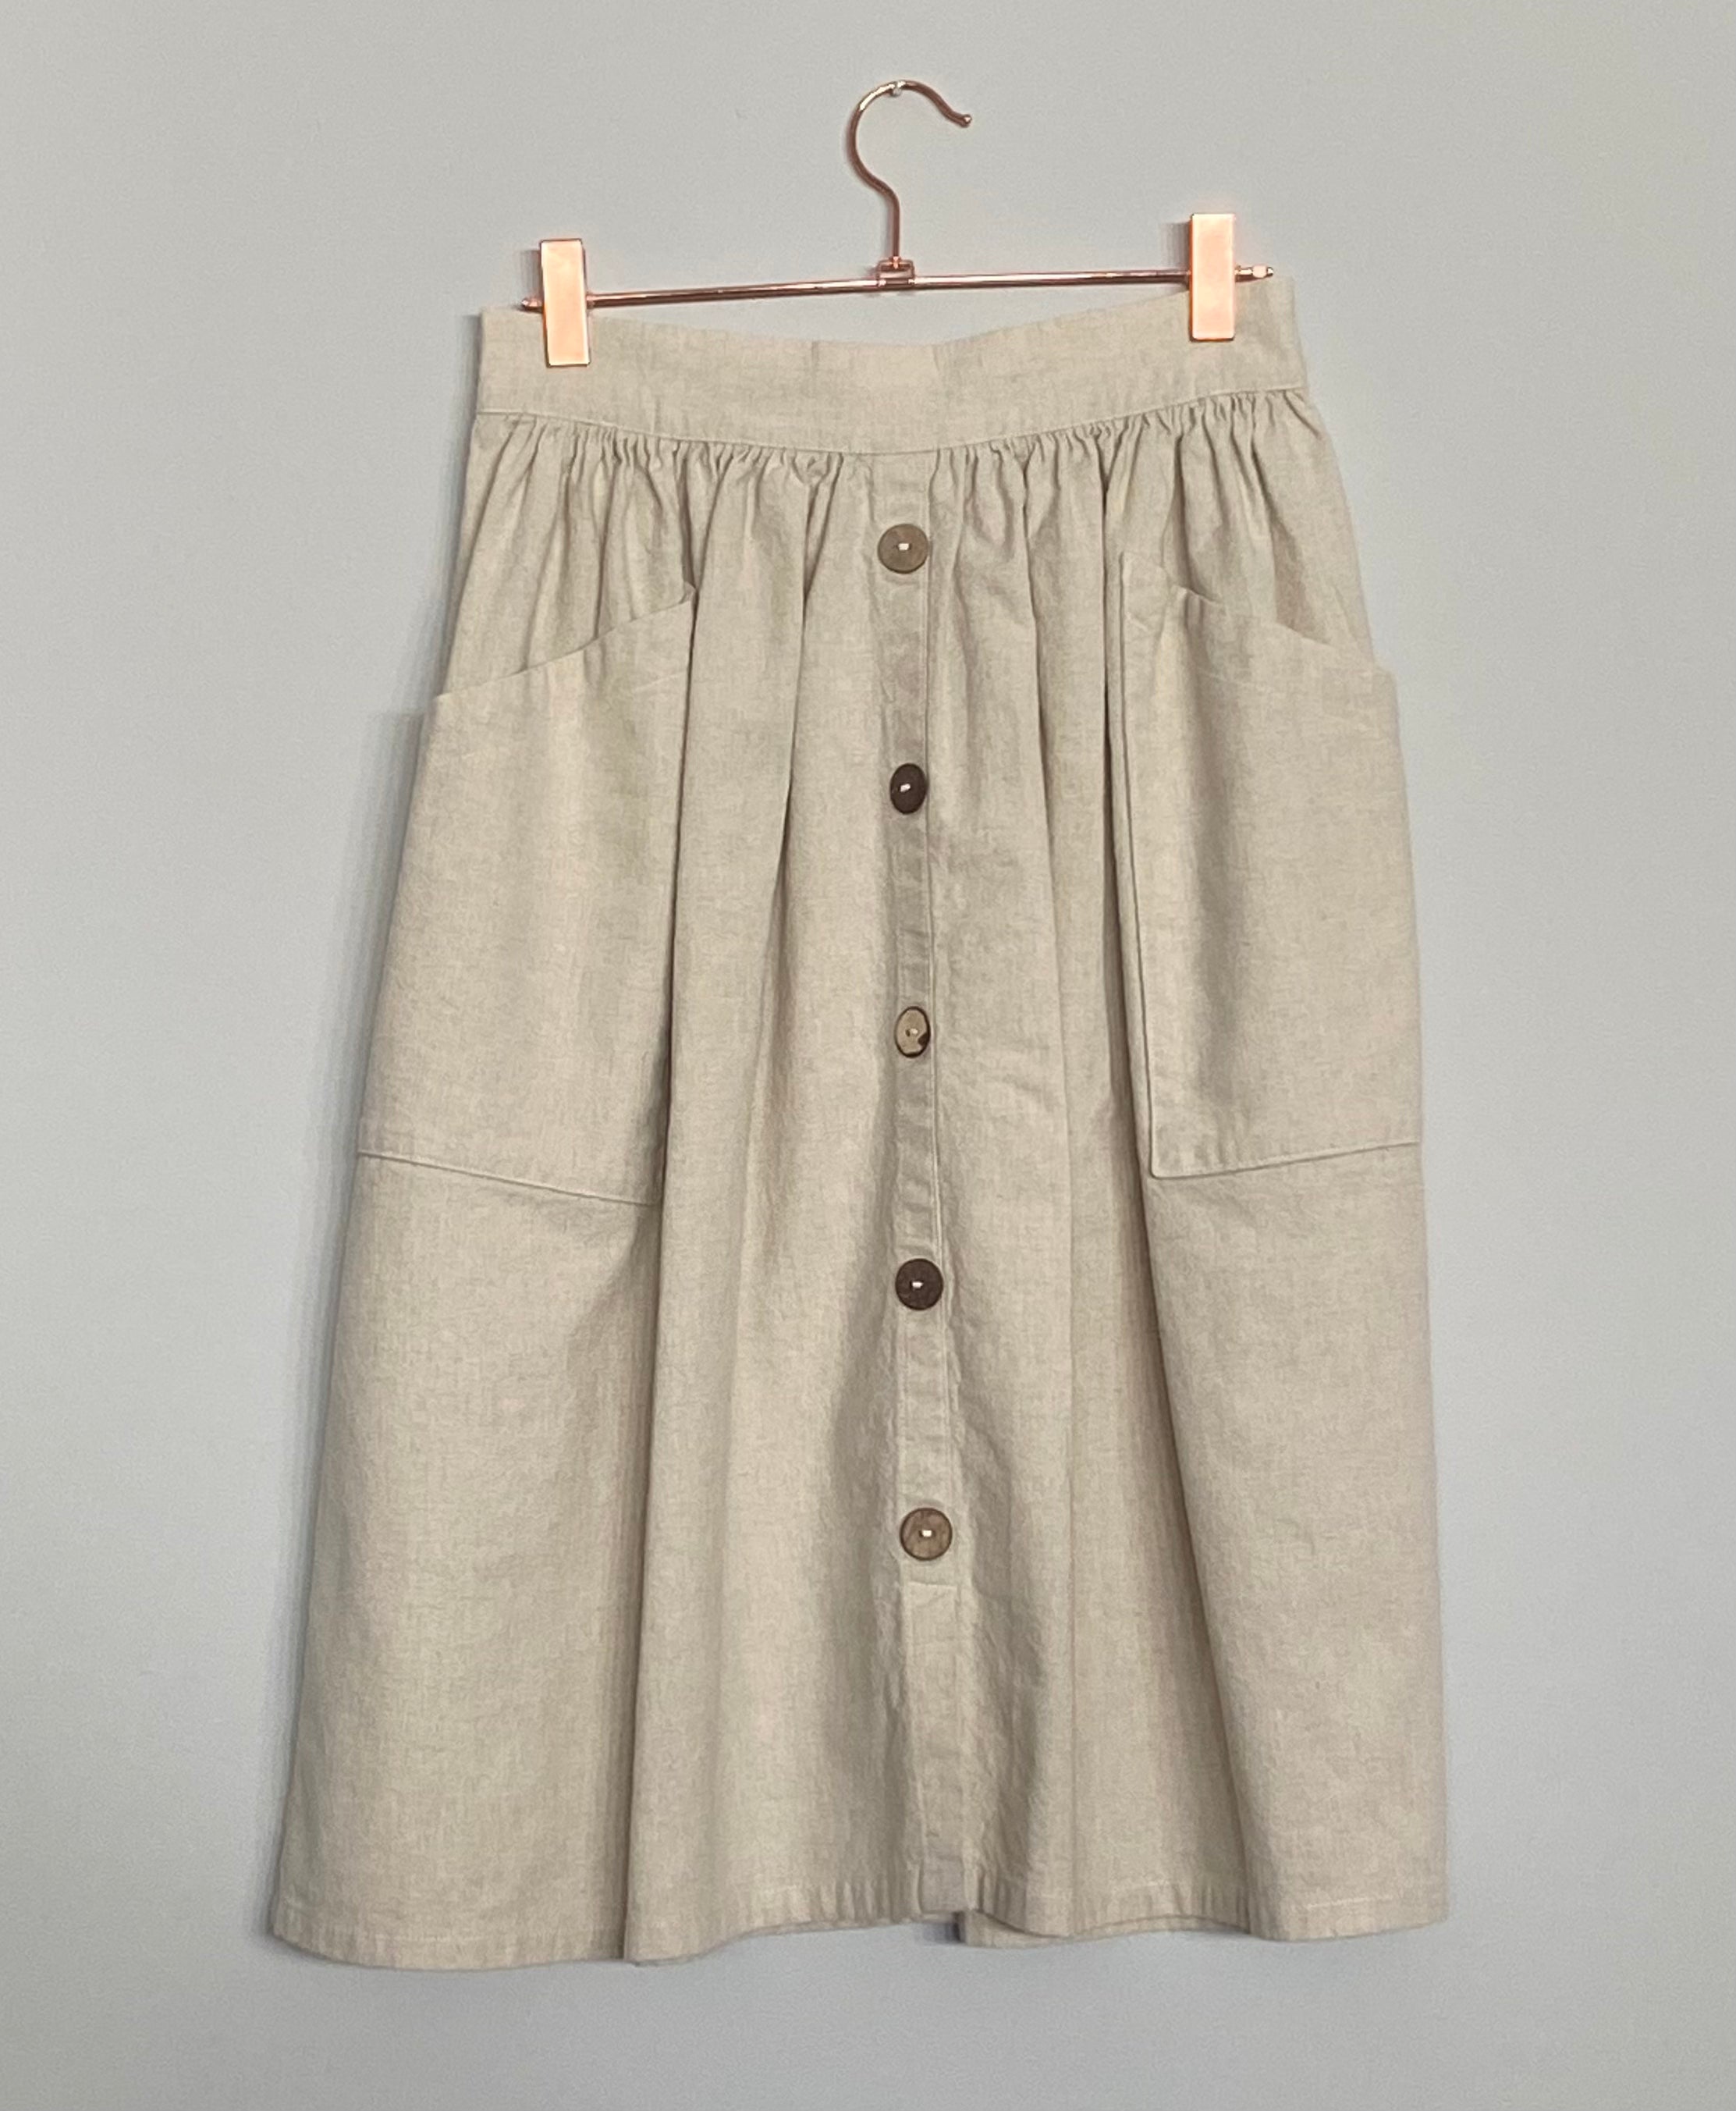 Marketplace, Small, The Skirt, Linen Cotton, Natural